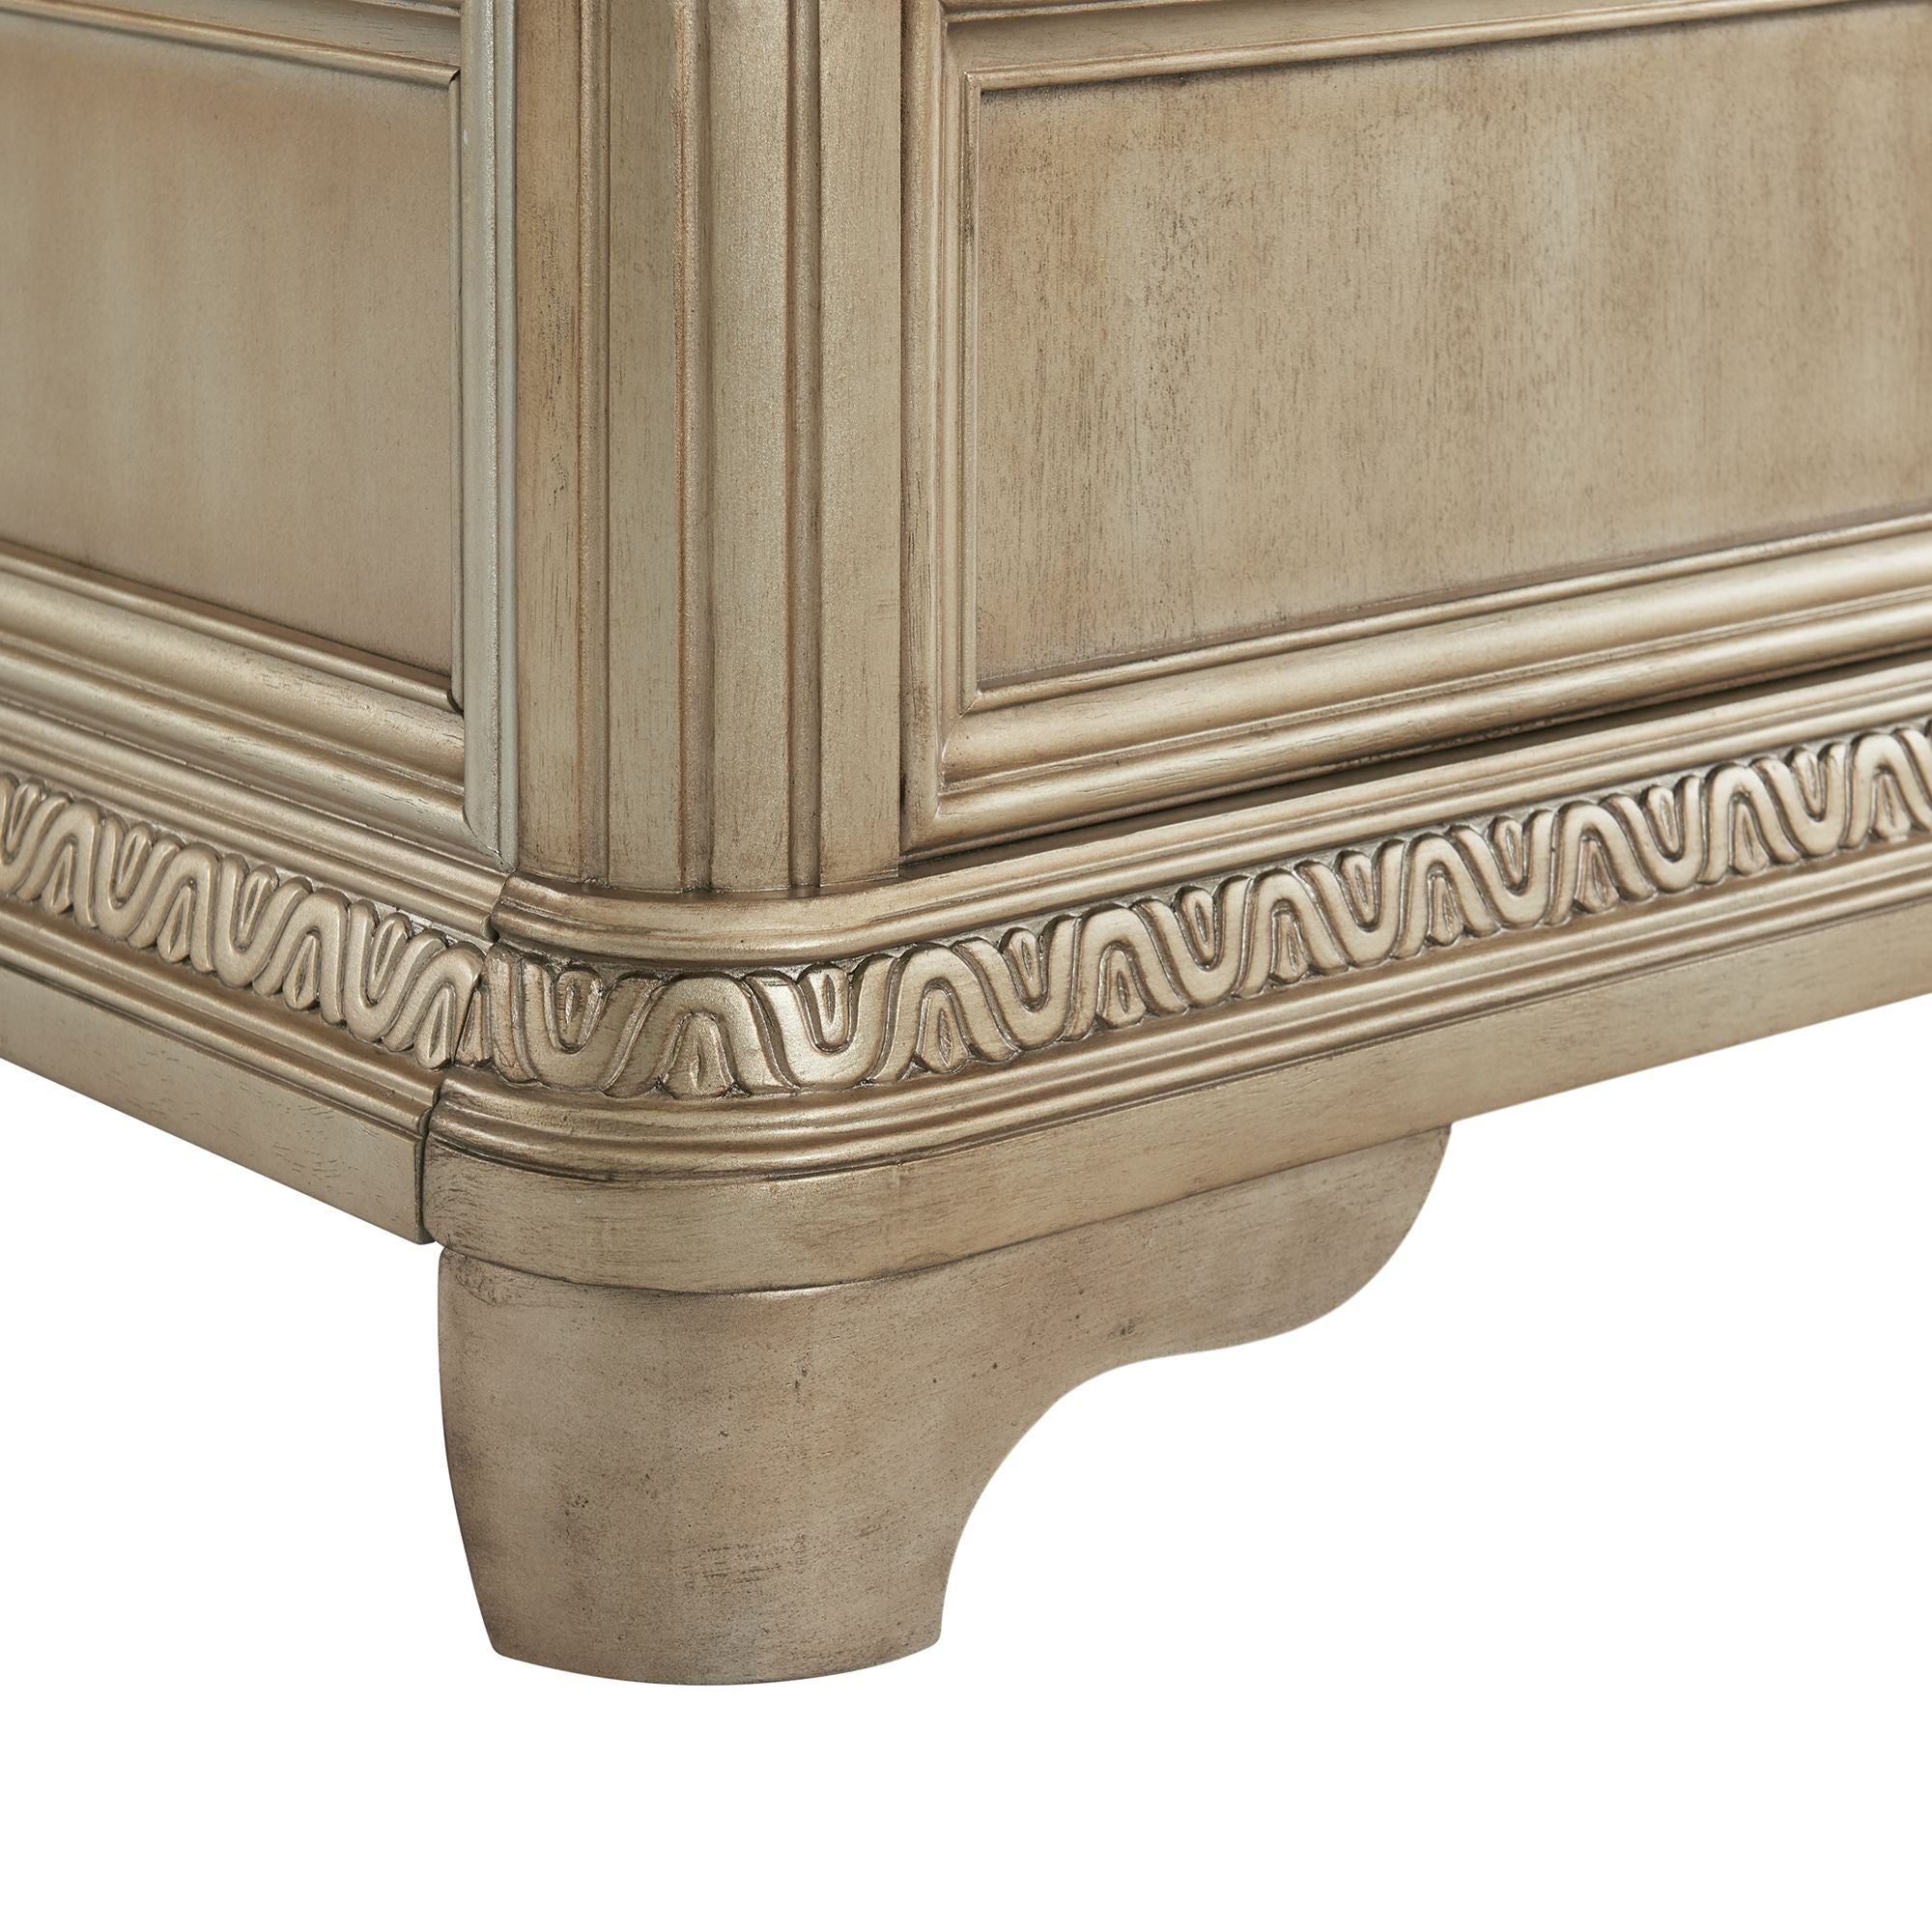 Vincenza Chest of Drawers